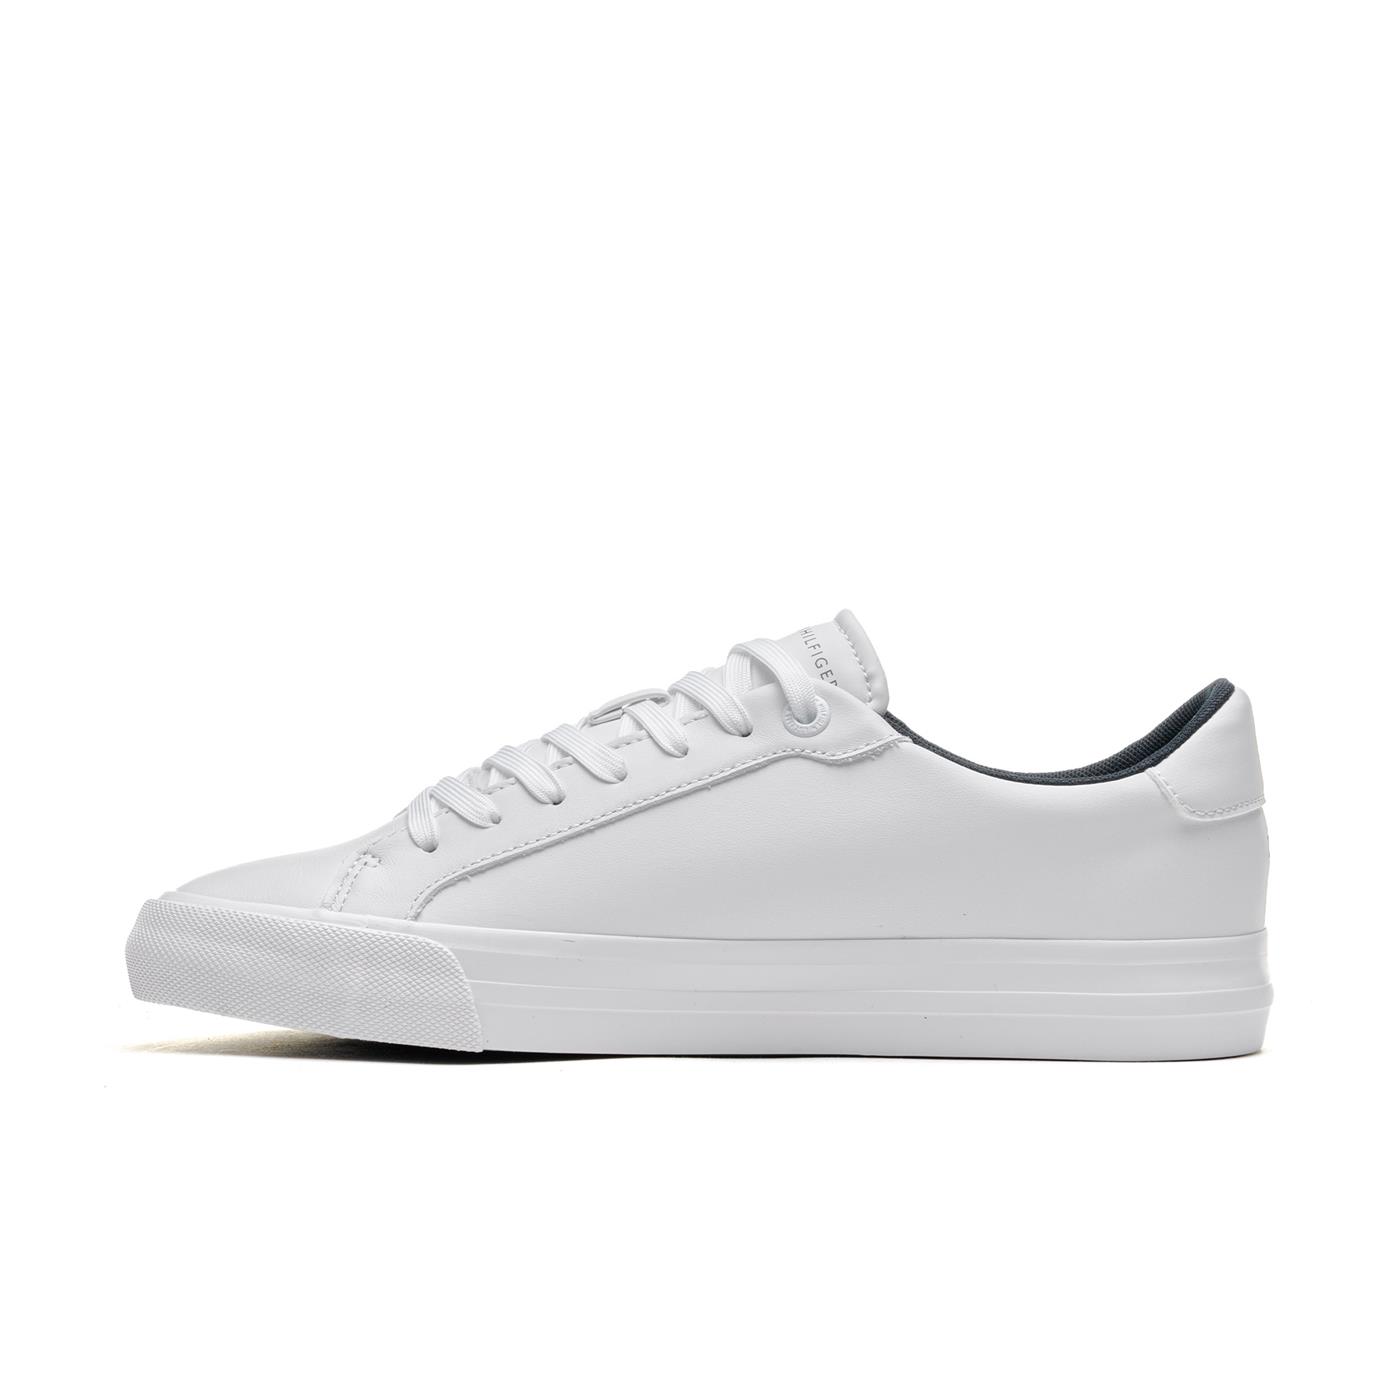 Vulc Modern Leather Trainers